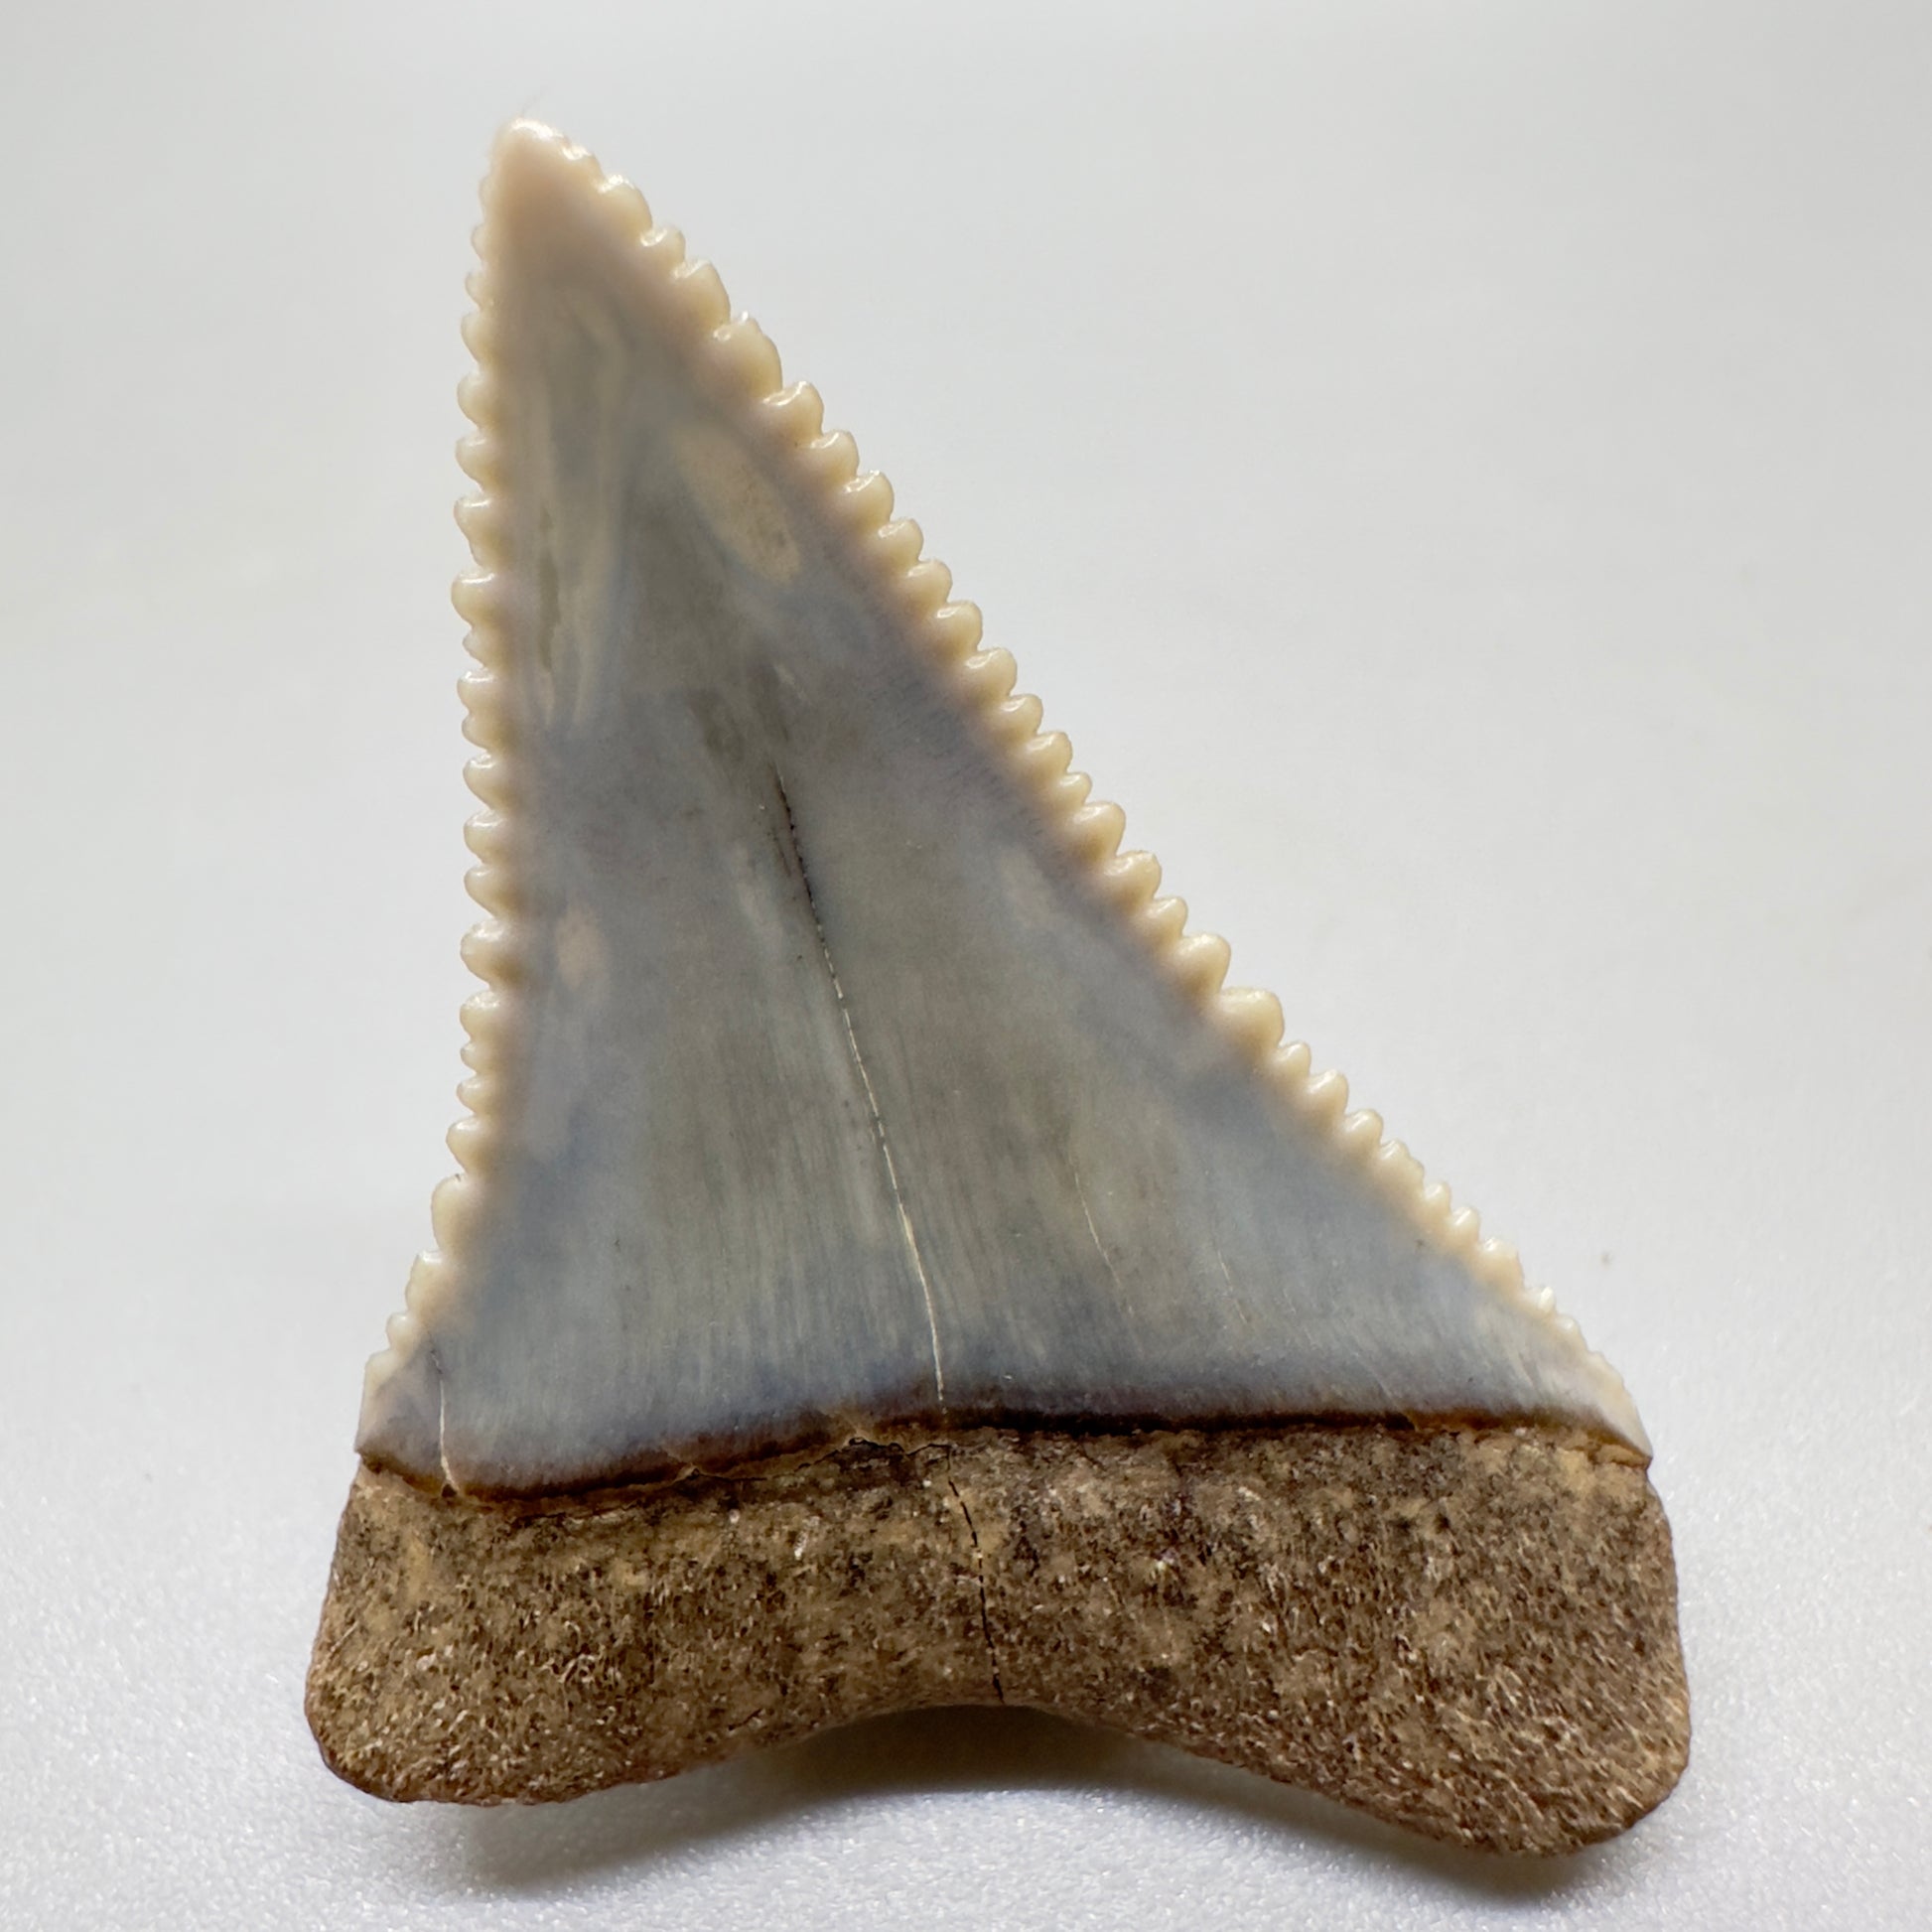 Serrated 1.51" Colorful Fossil Great White Tooth from Sacaco, Peru - Unique Collectible GW1052 - Back